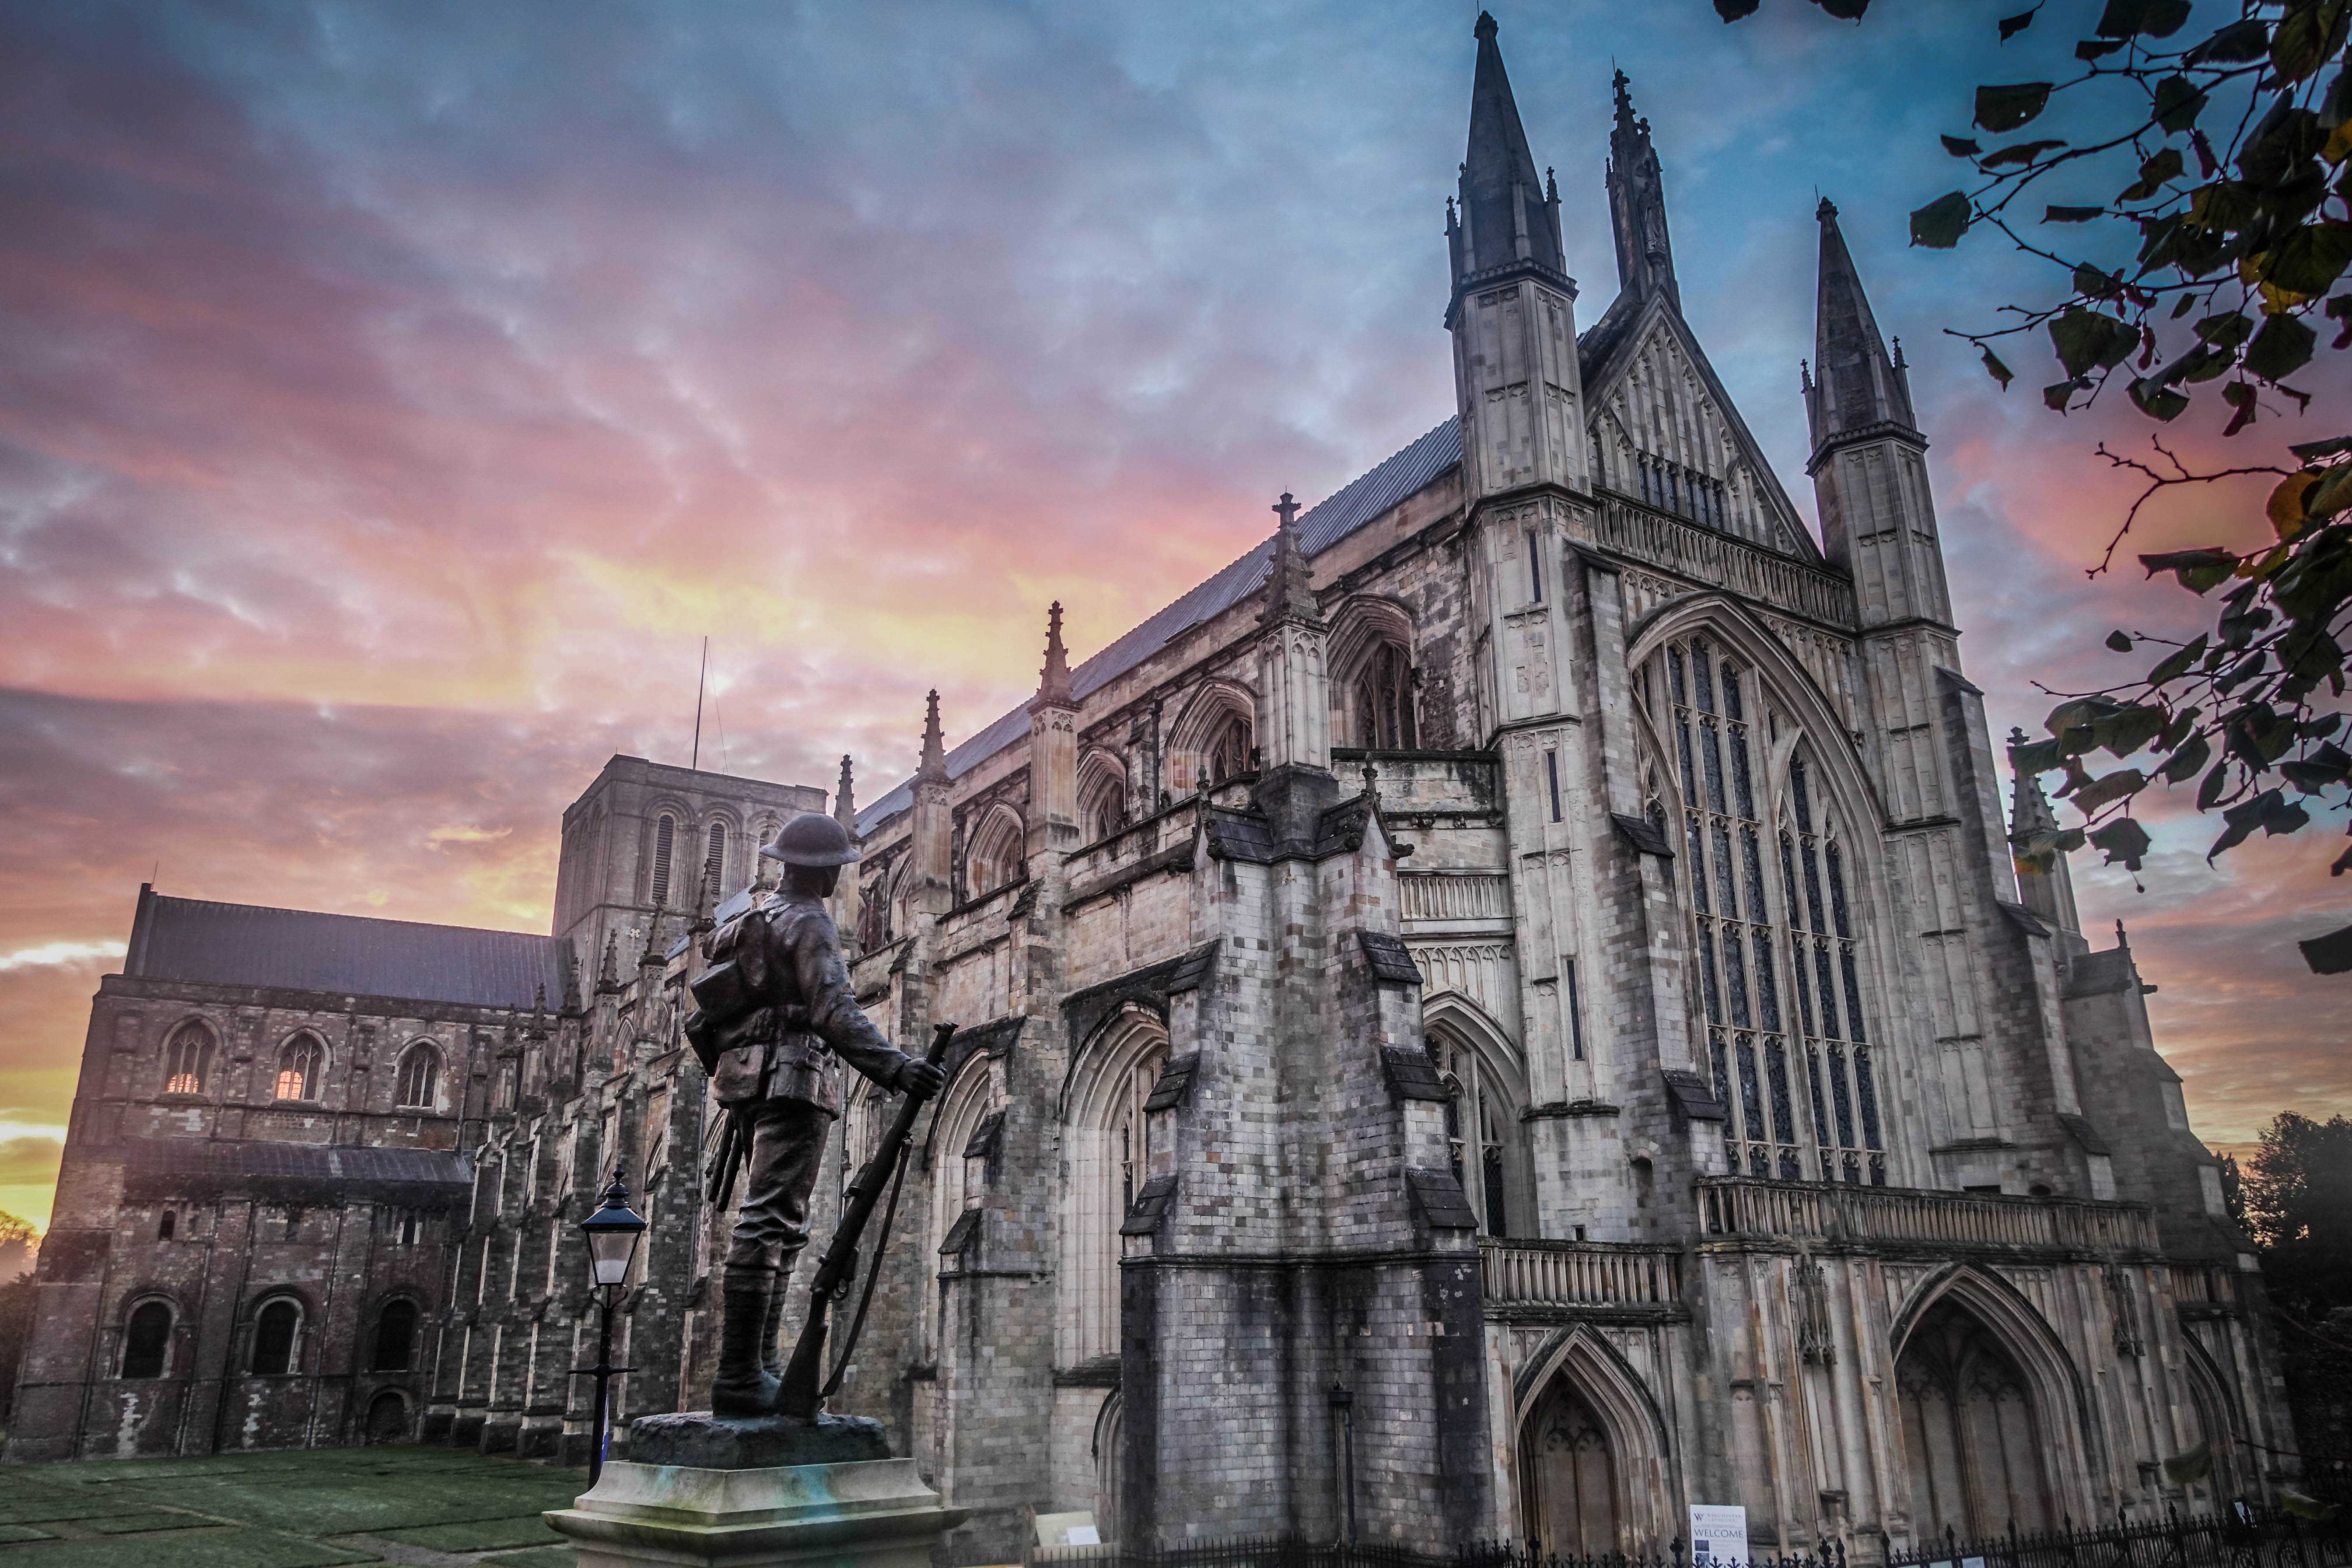 Winchester, England: A Visit to England's Rich Past